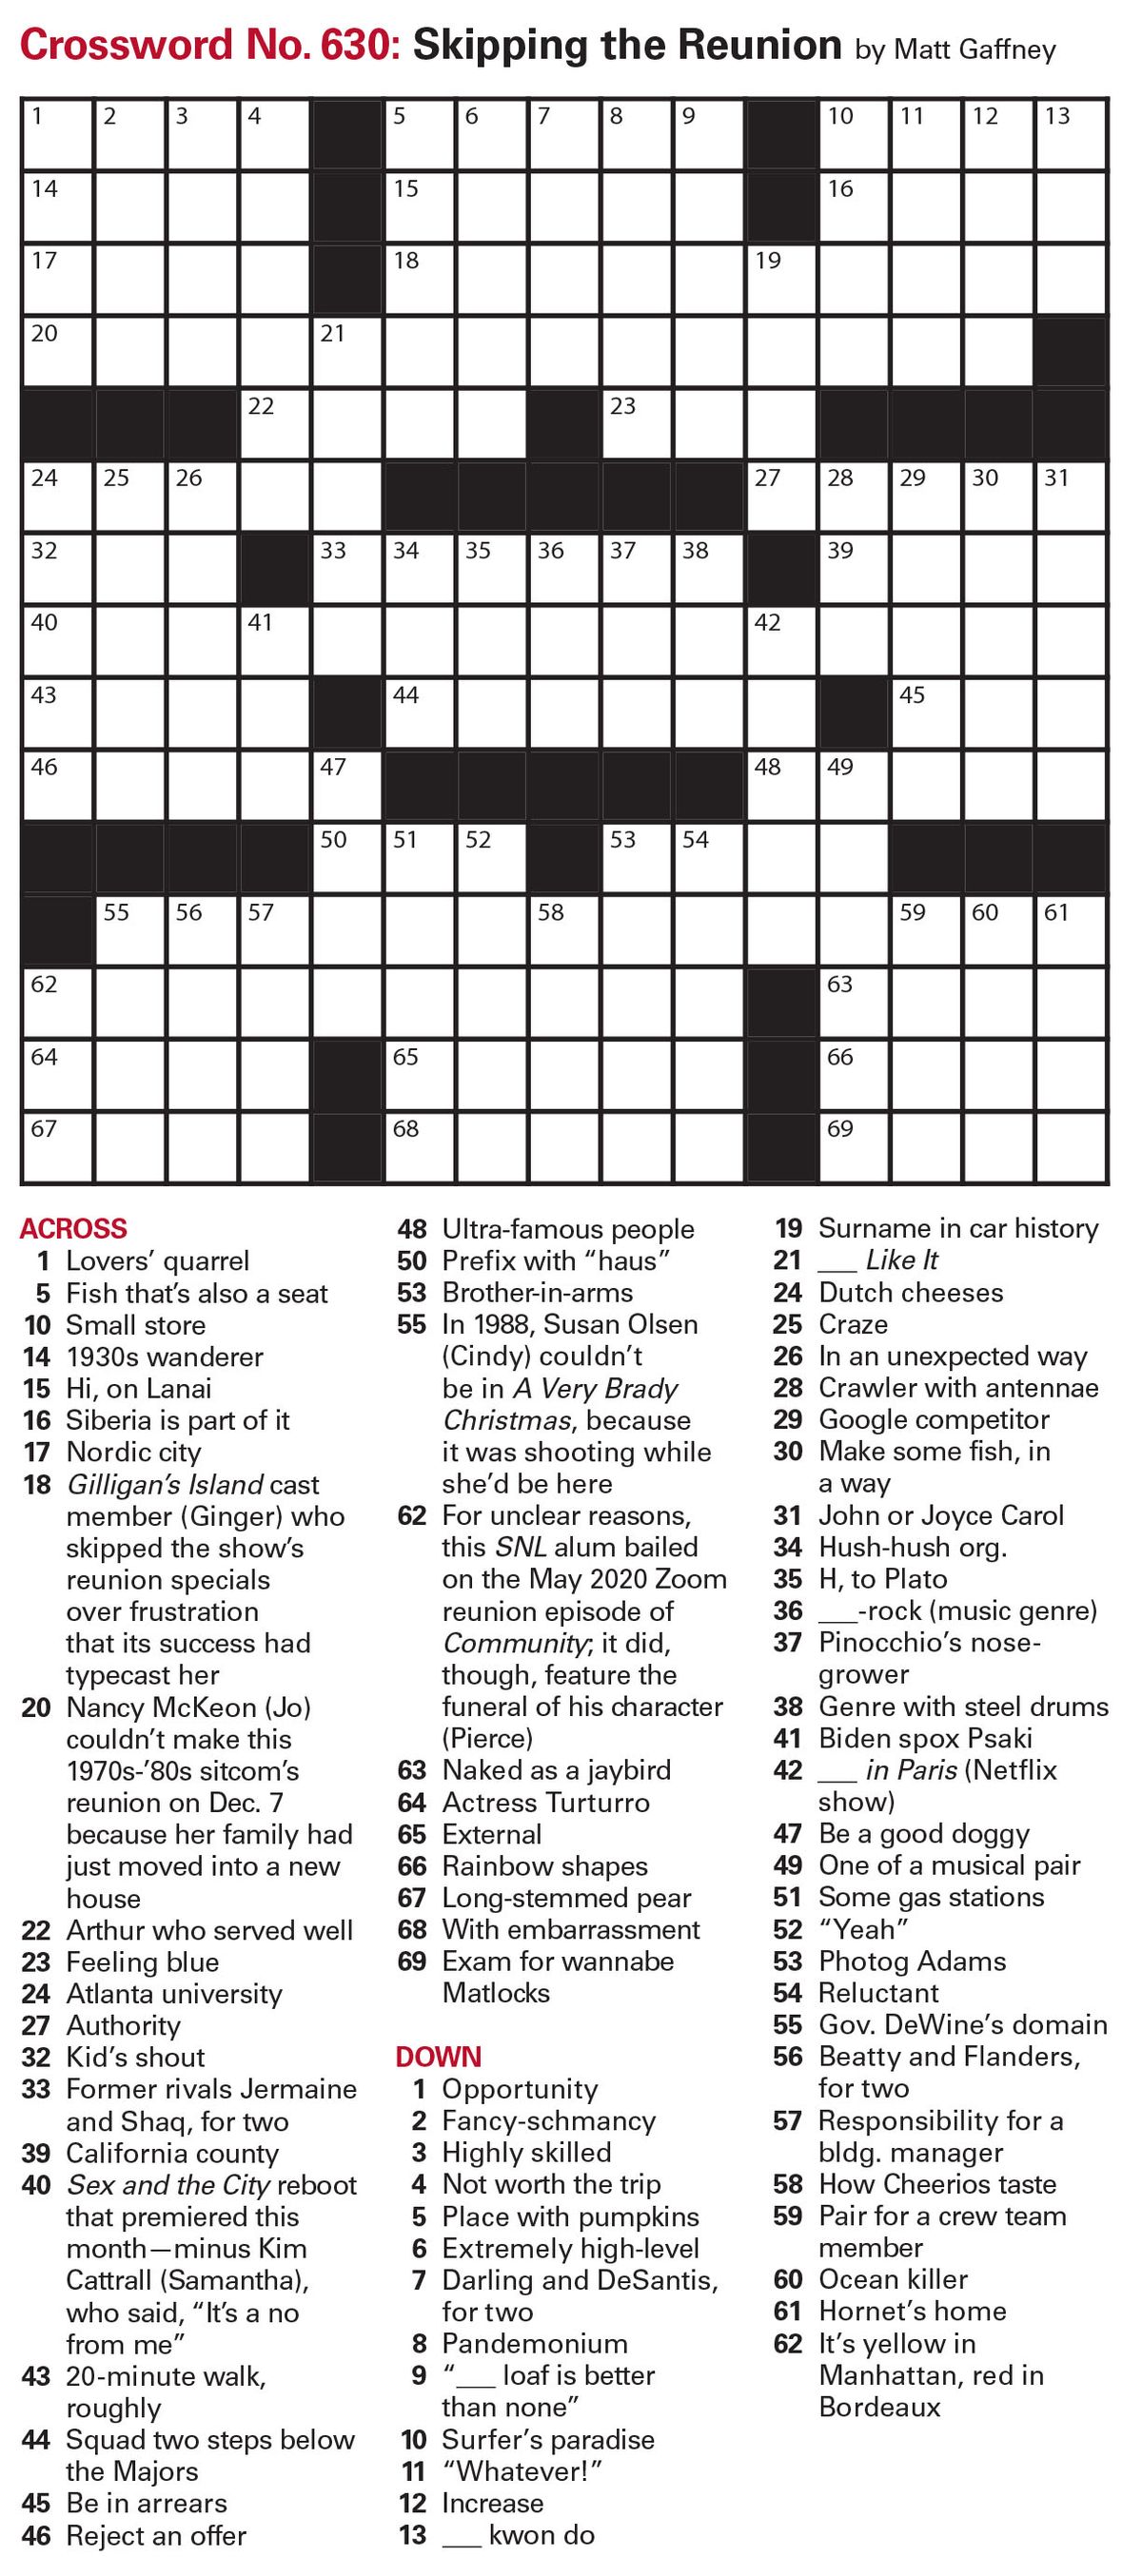 Science Theme Crossword Puzzle for August 22nd, 2021 - RF Cafe